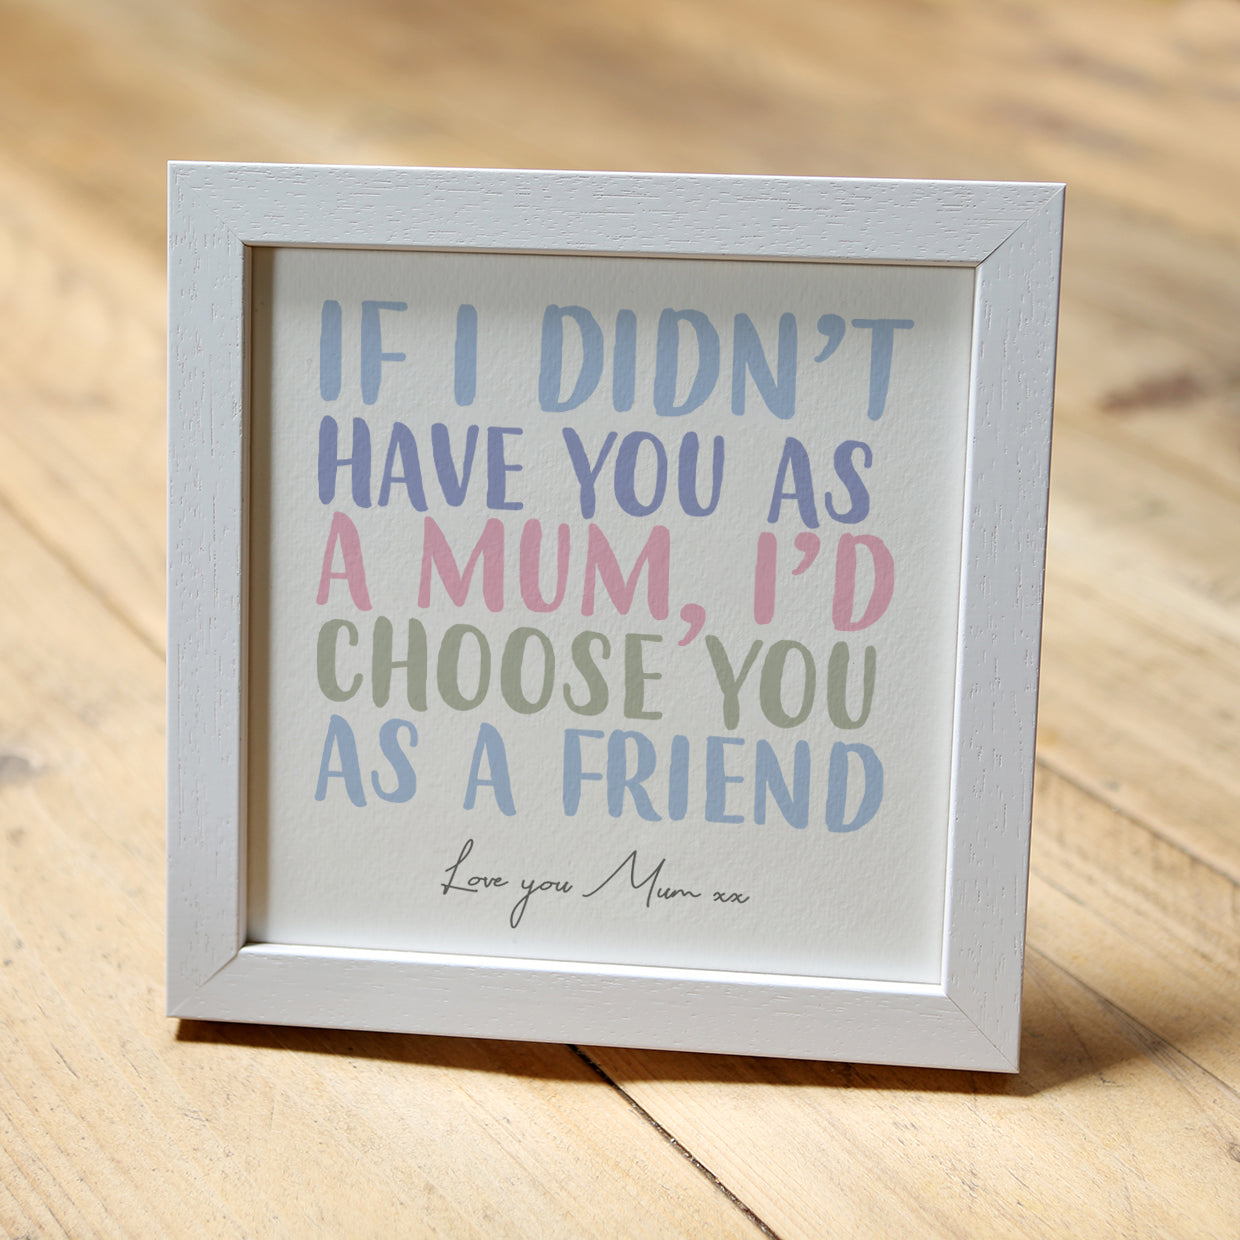 'I'D CHOOSE YOU AS A FRIEND' - Personalised Wall Art